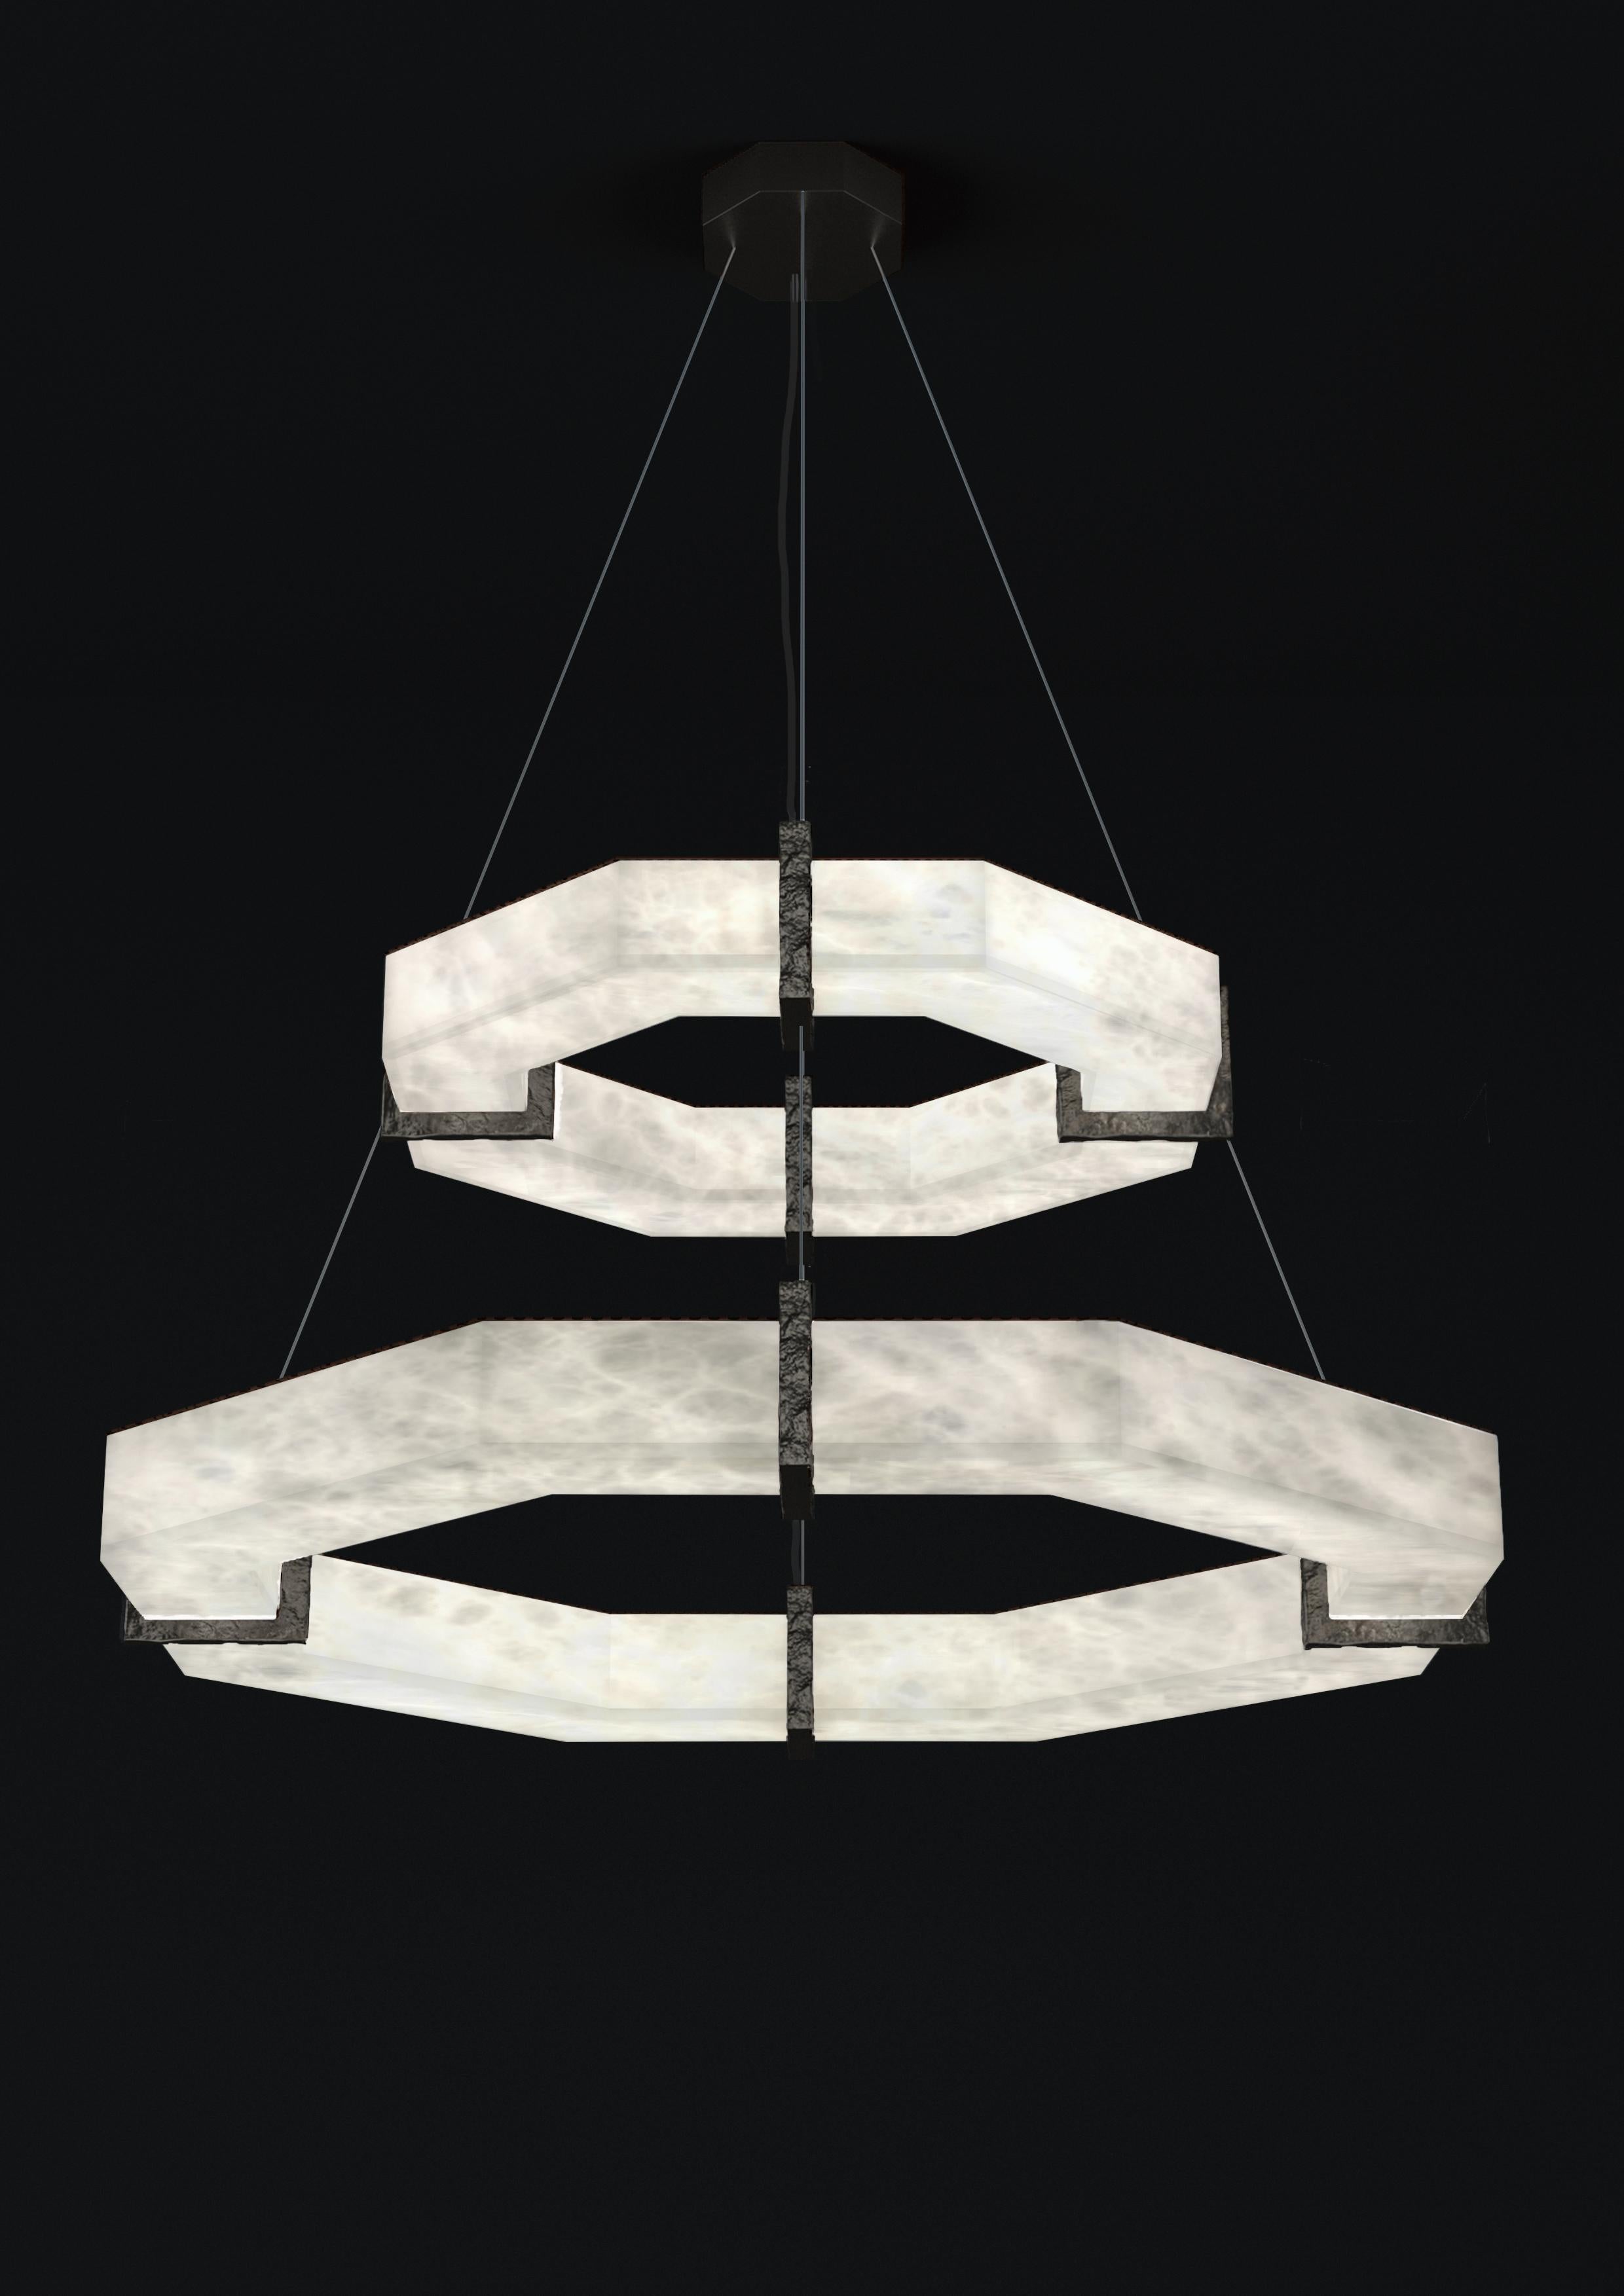 Efesto Brushed Black Metal Double Pendant Lamp by Alabastro Italiano
Dimensions: D 80.5 x W 80.5 x H 36.5 cm.
Materials: White alabaster and metal.

Available in different finishes: Shiny Silver, Bronze, Brushed Brass, Ruggine of Florence, Brushed